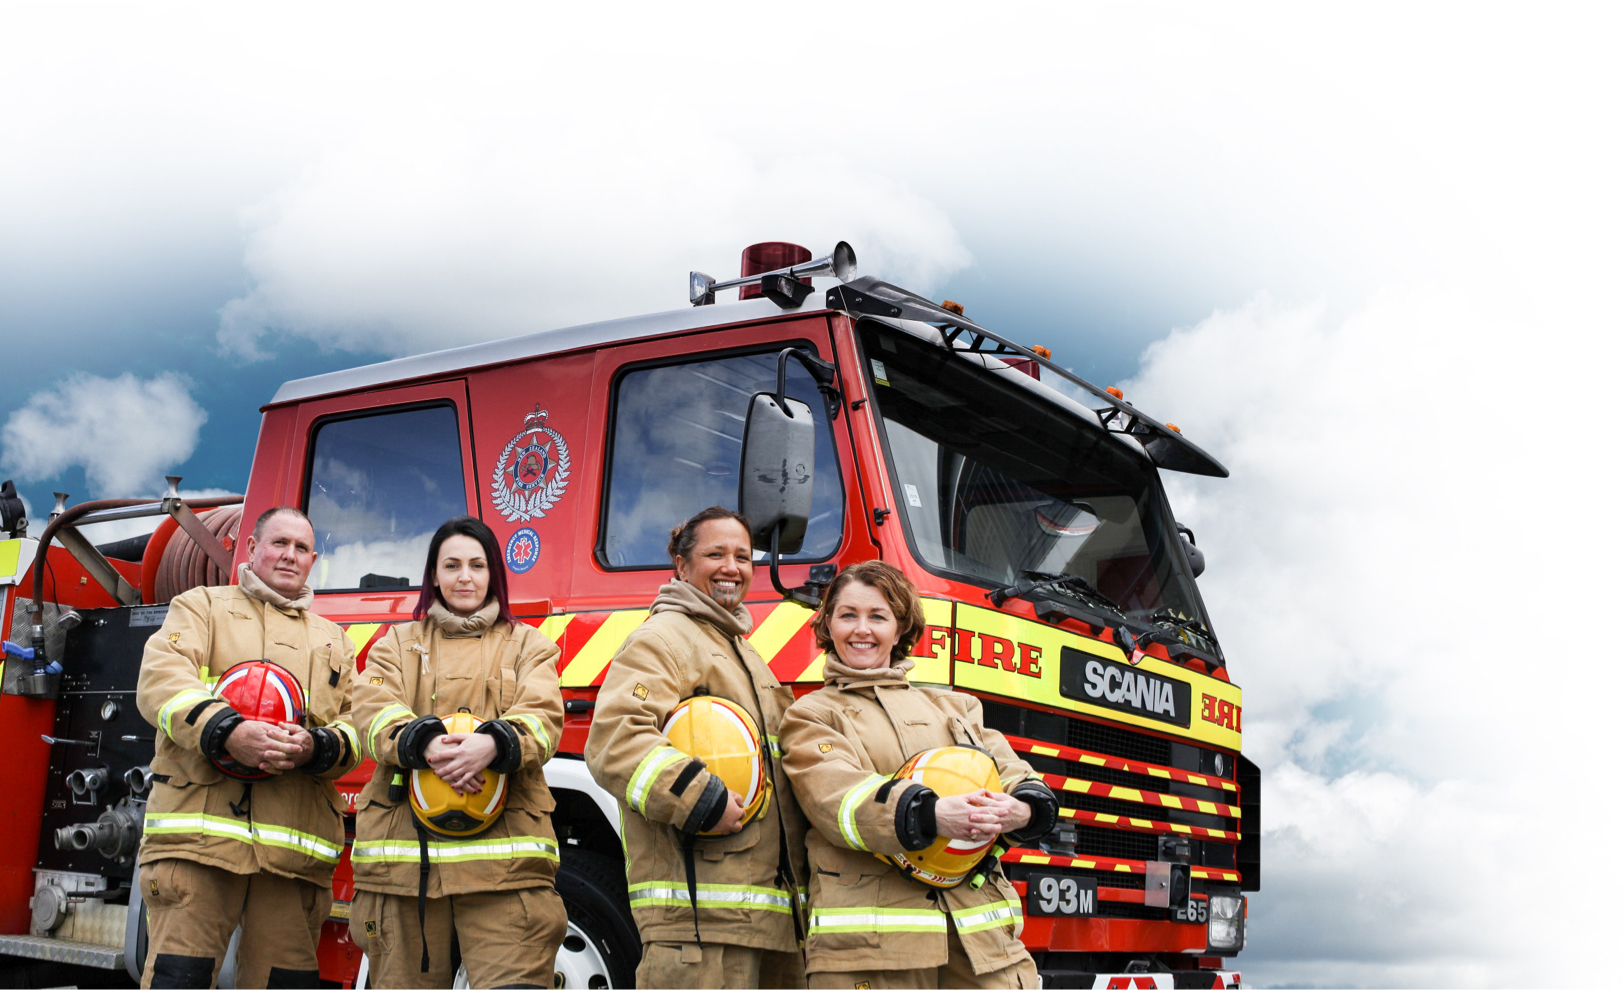 Group of firefighters in full kit standing in front of a fire engine